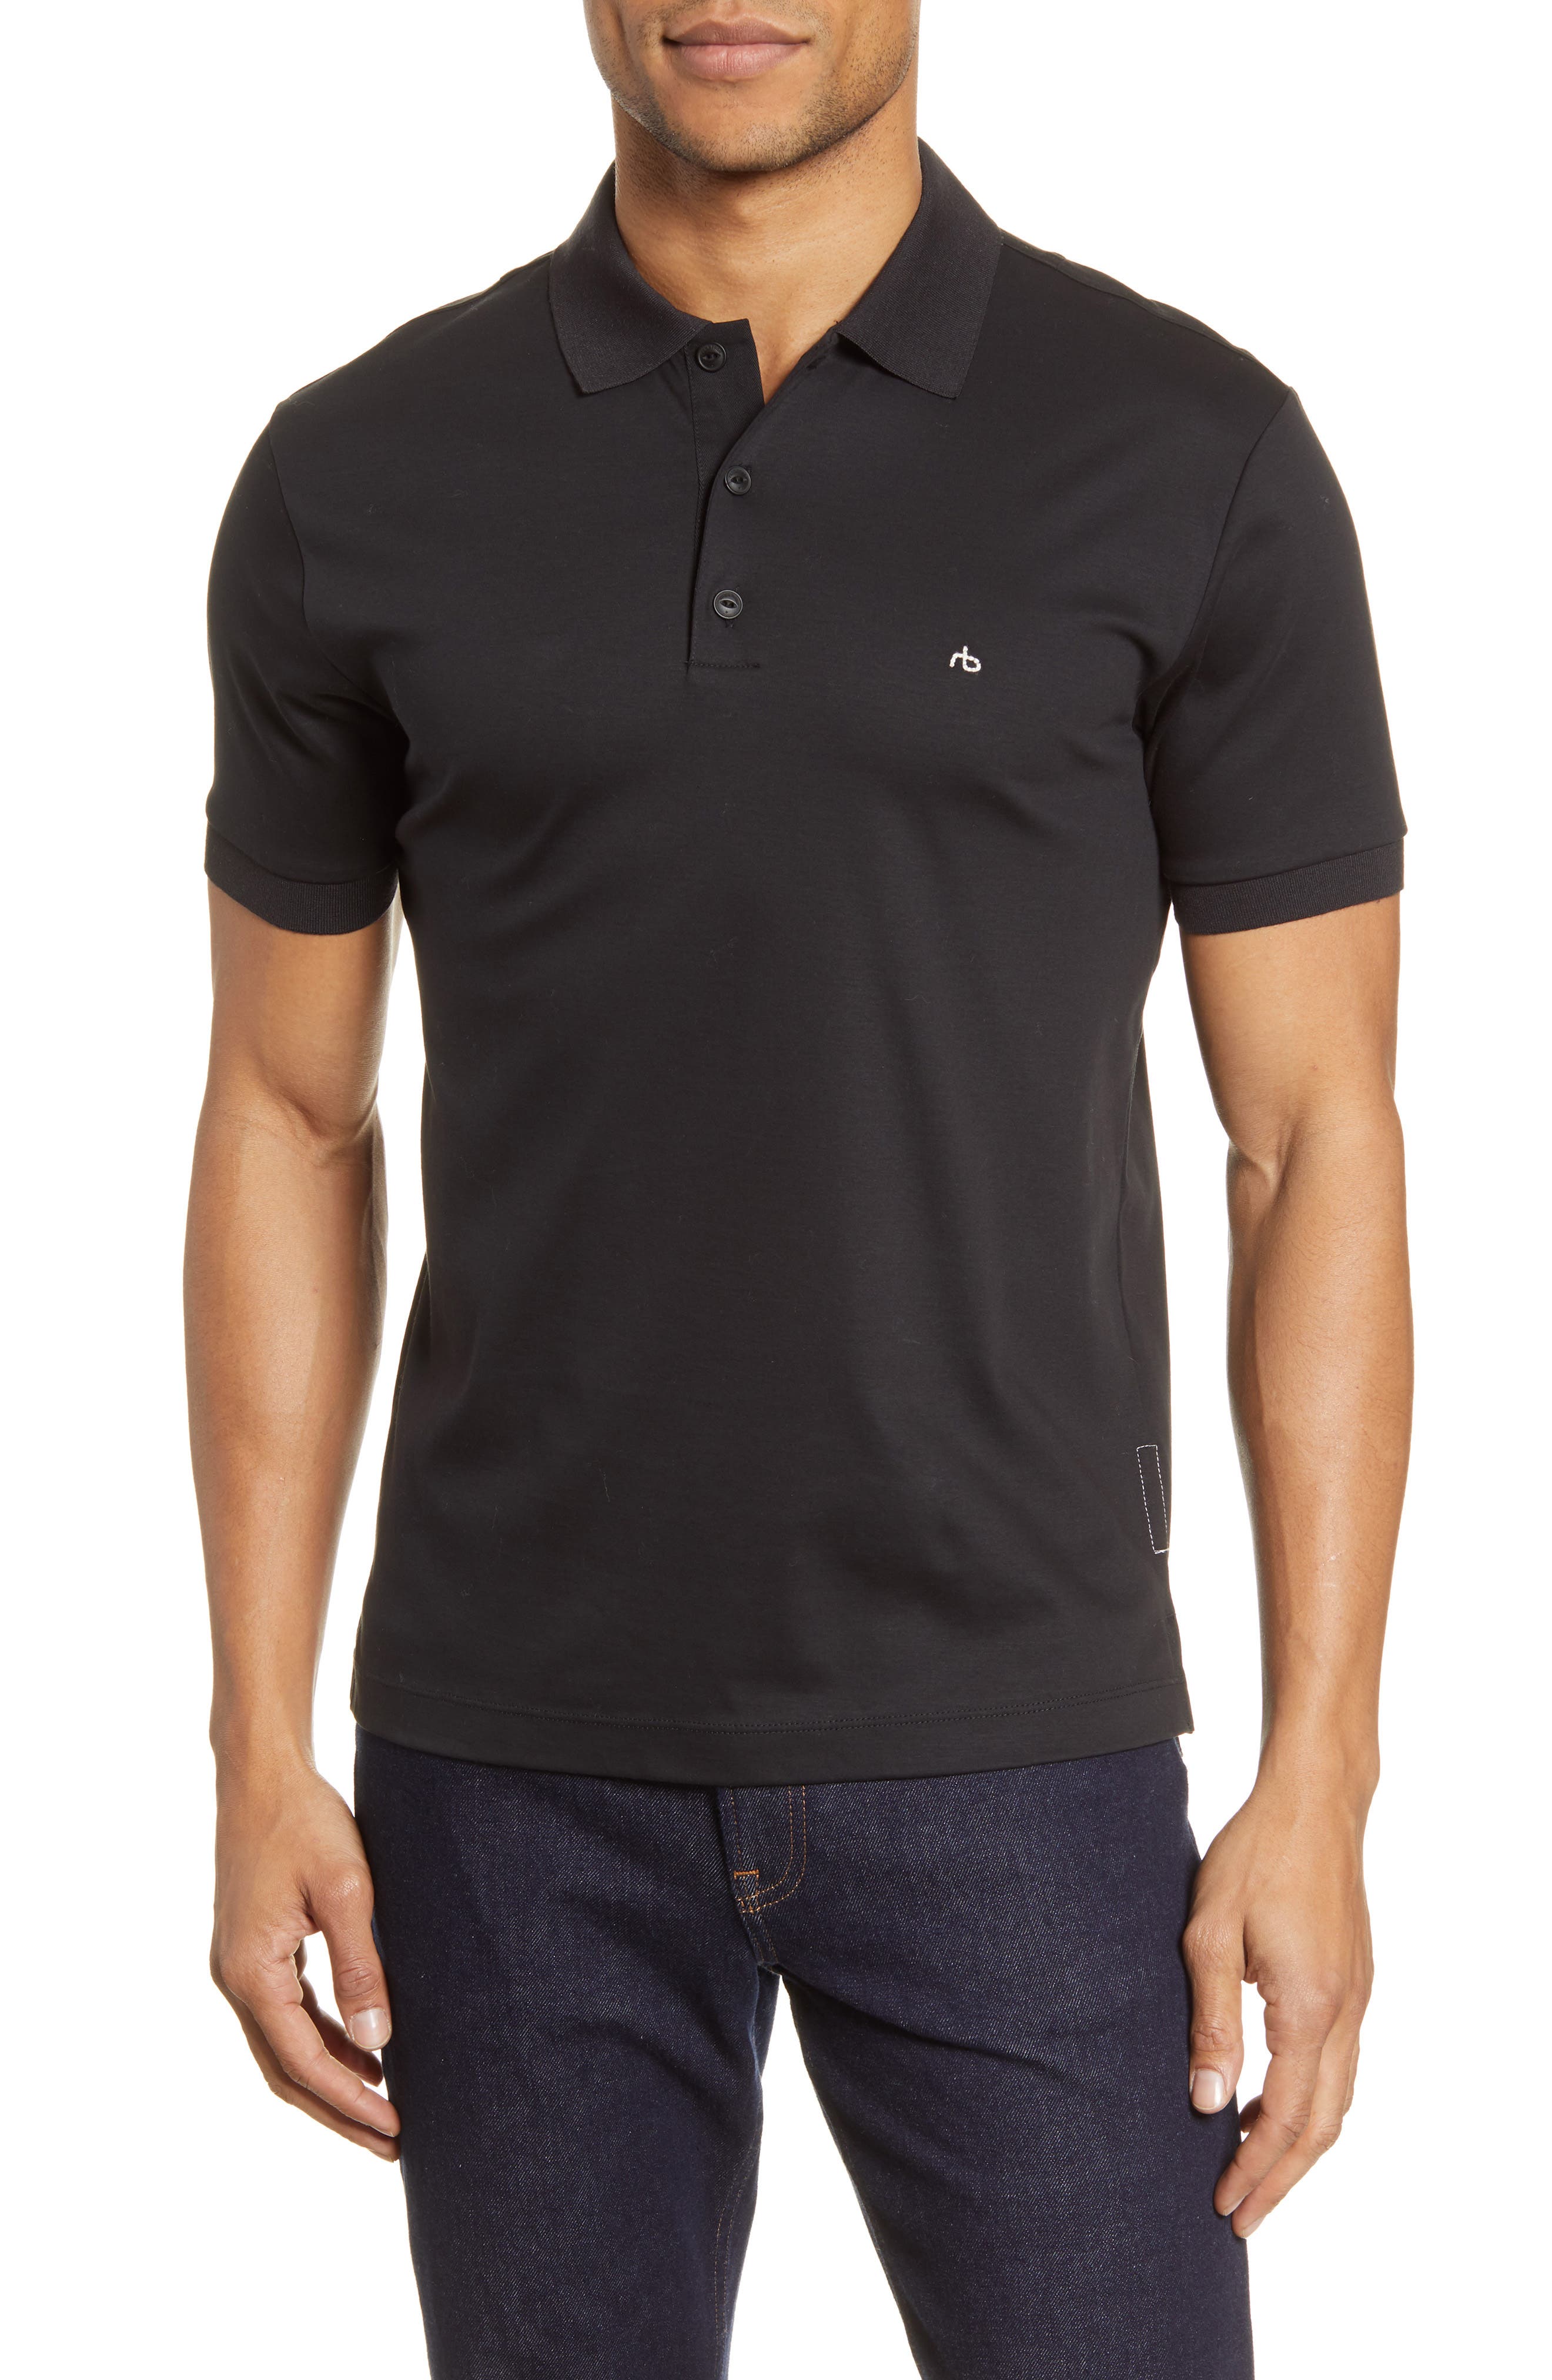 Size Small Details about   Men's Rag & Bone Double Knit Polo Top in Black 